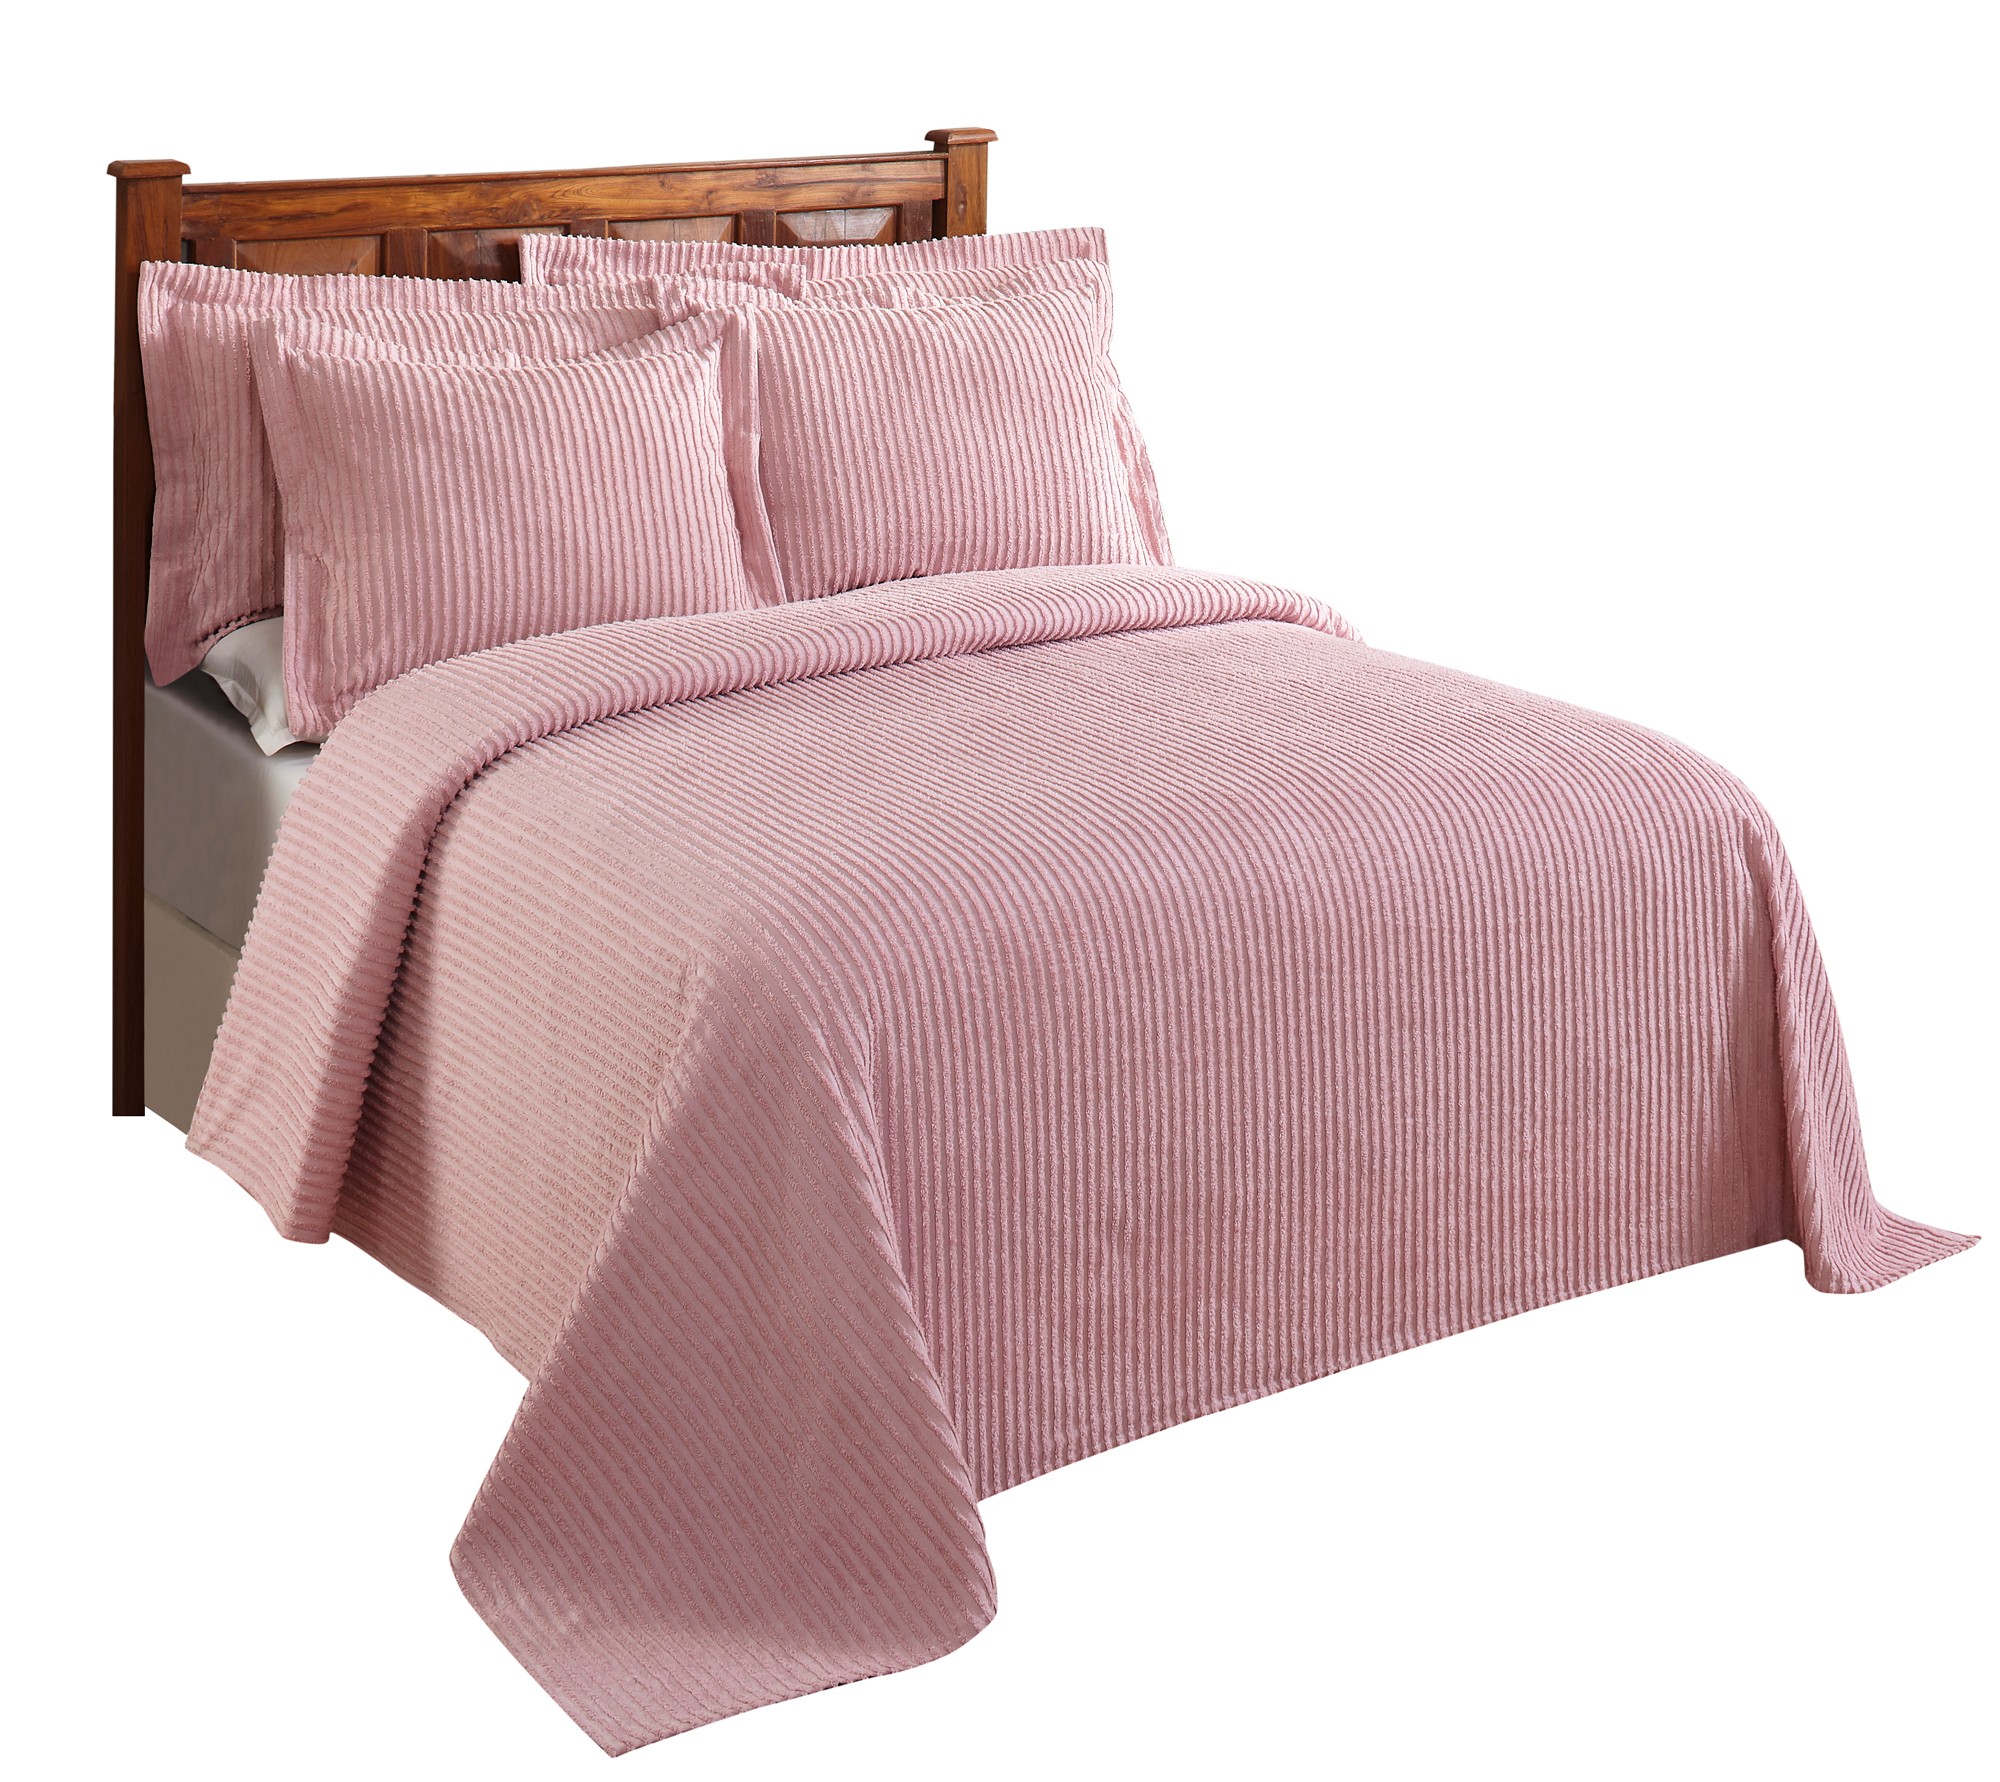 Better Trends Jullian Stripe Design 100% Cotton for All Ages  Full/Double Bedspread - Pink - image 3 of 6